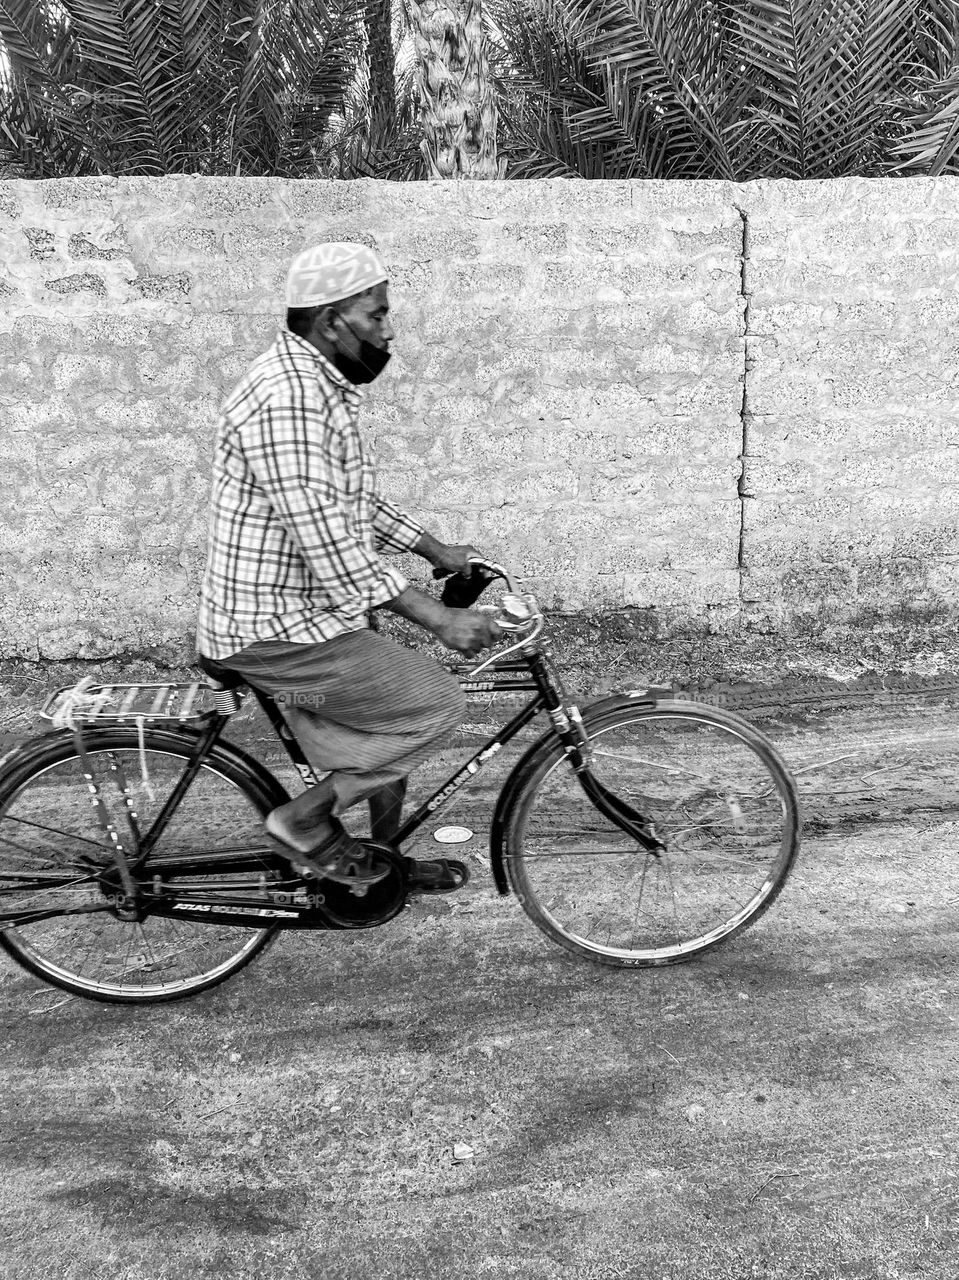 A man on a bicycle returning home